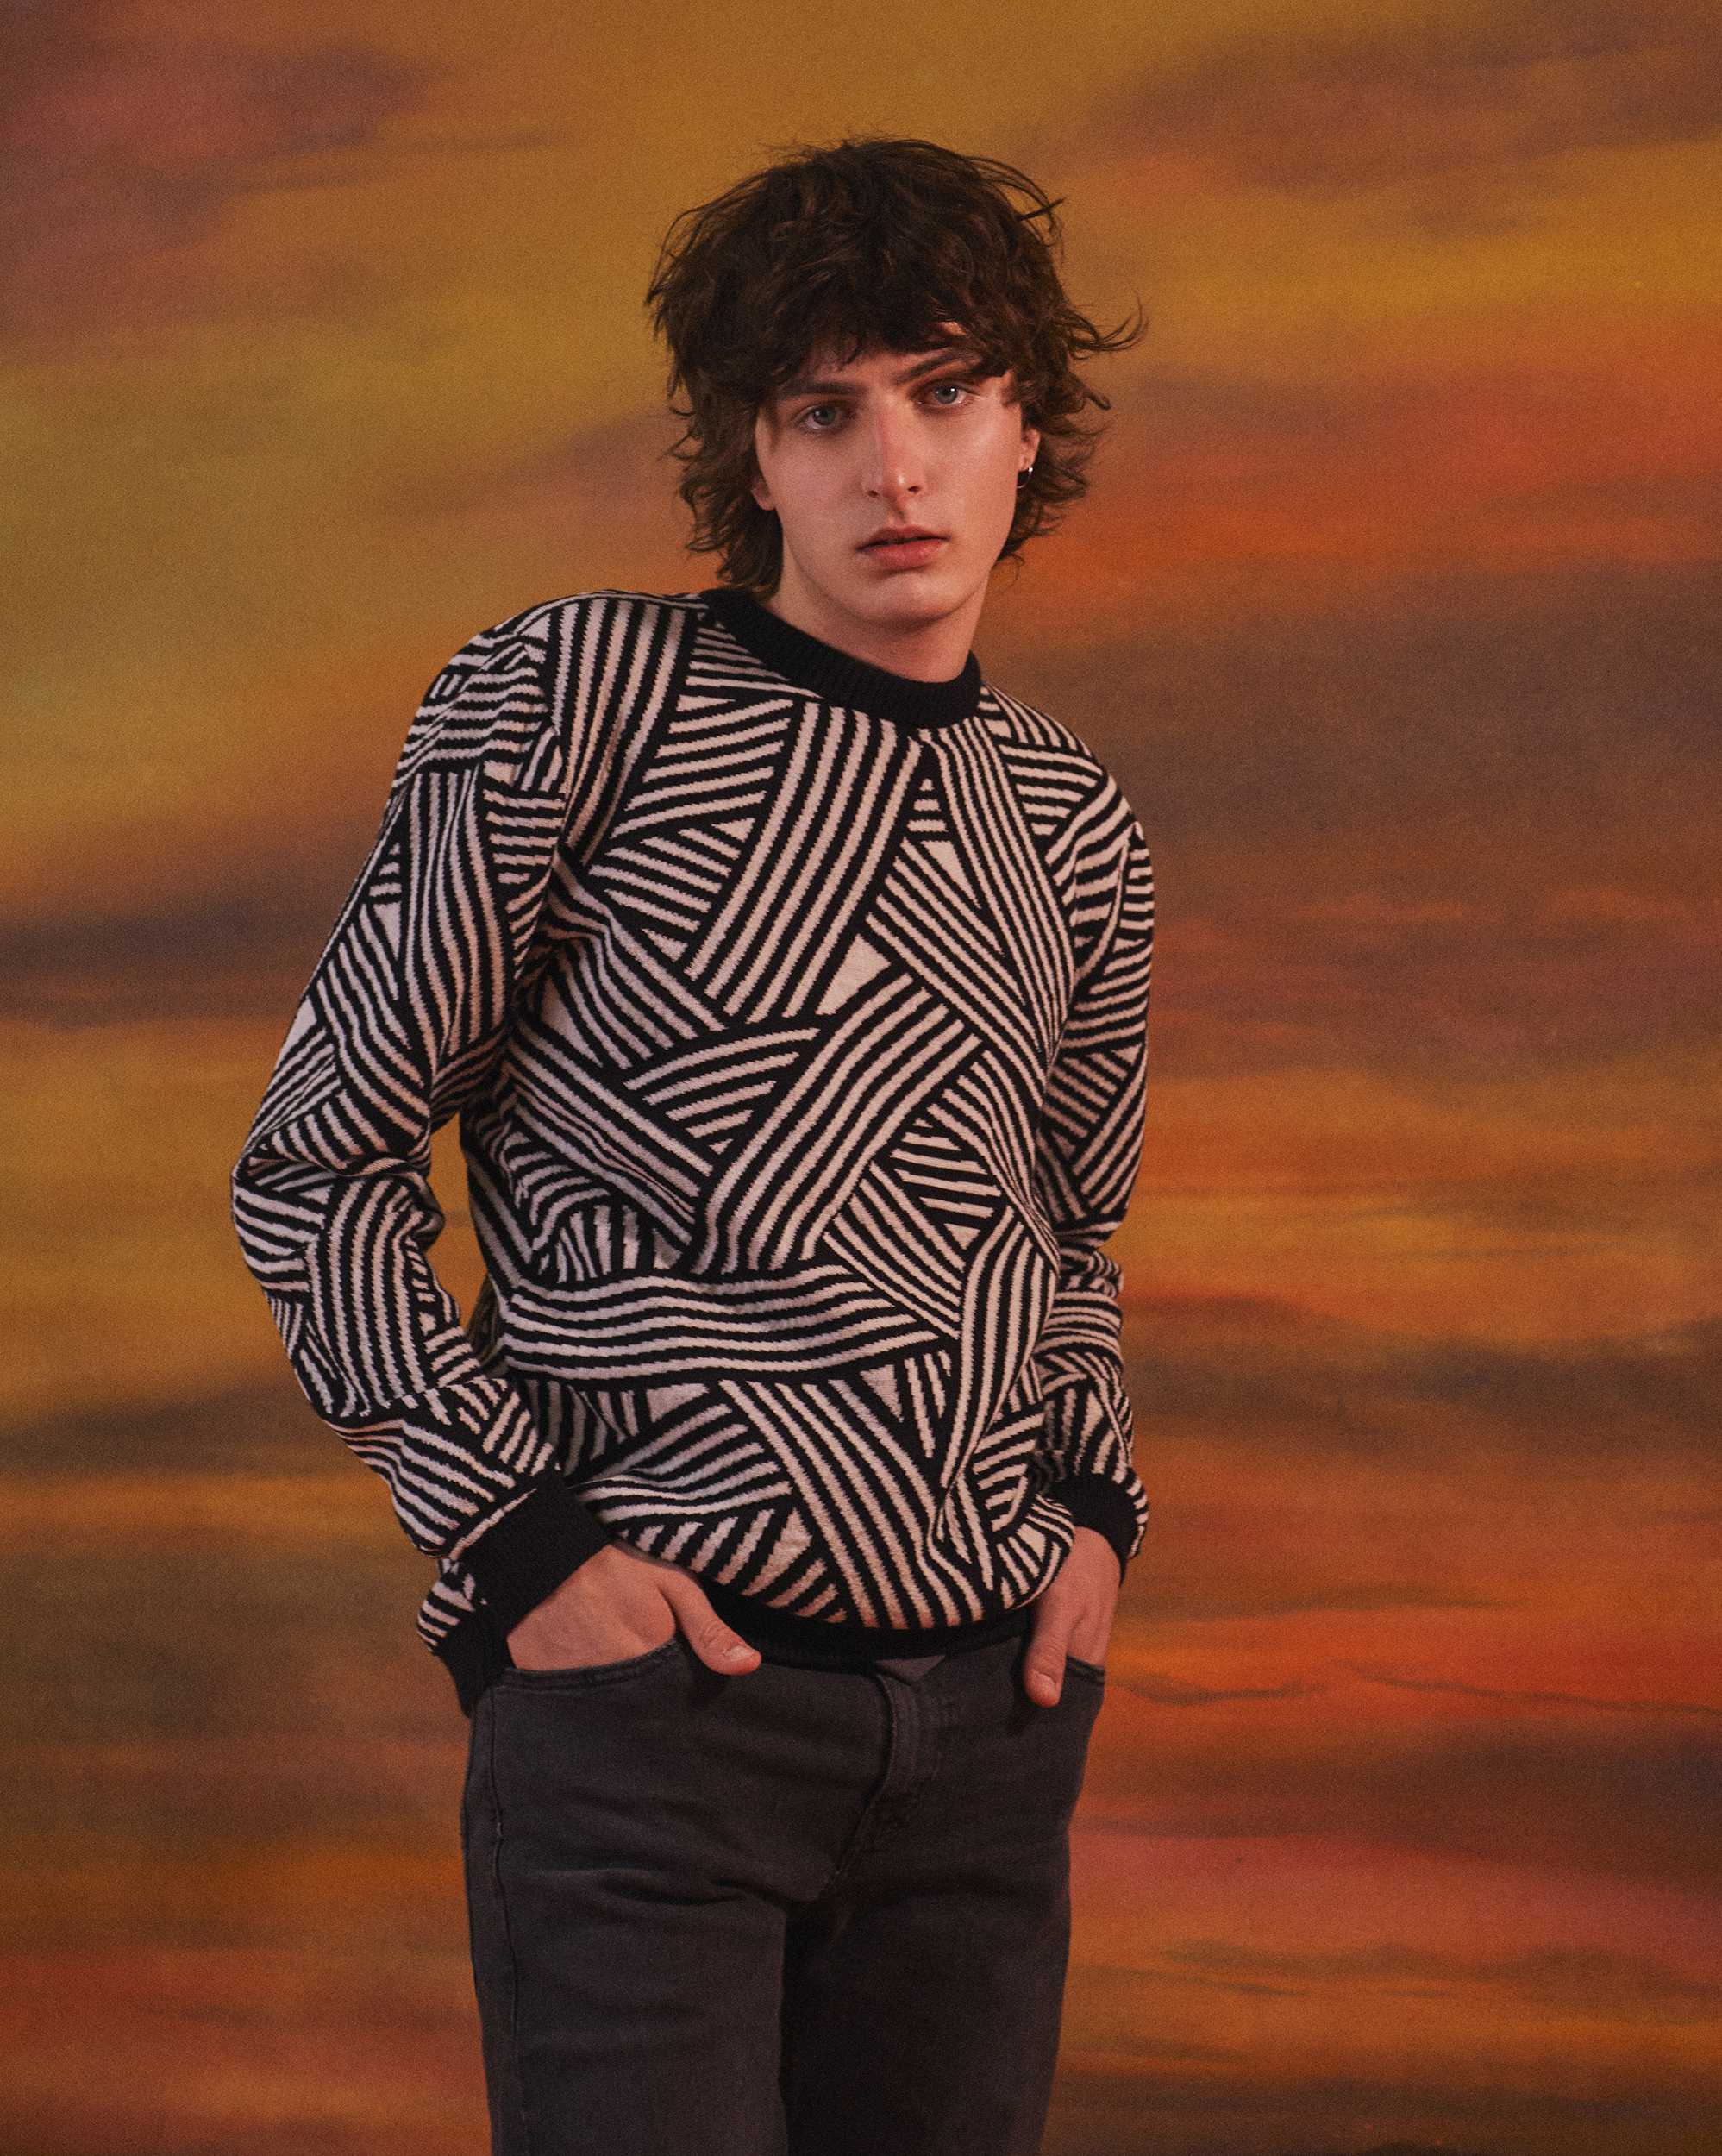 Man standing infront of sunset in a stripy black and white knitted jumper and black jeans 